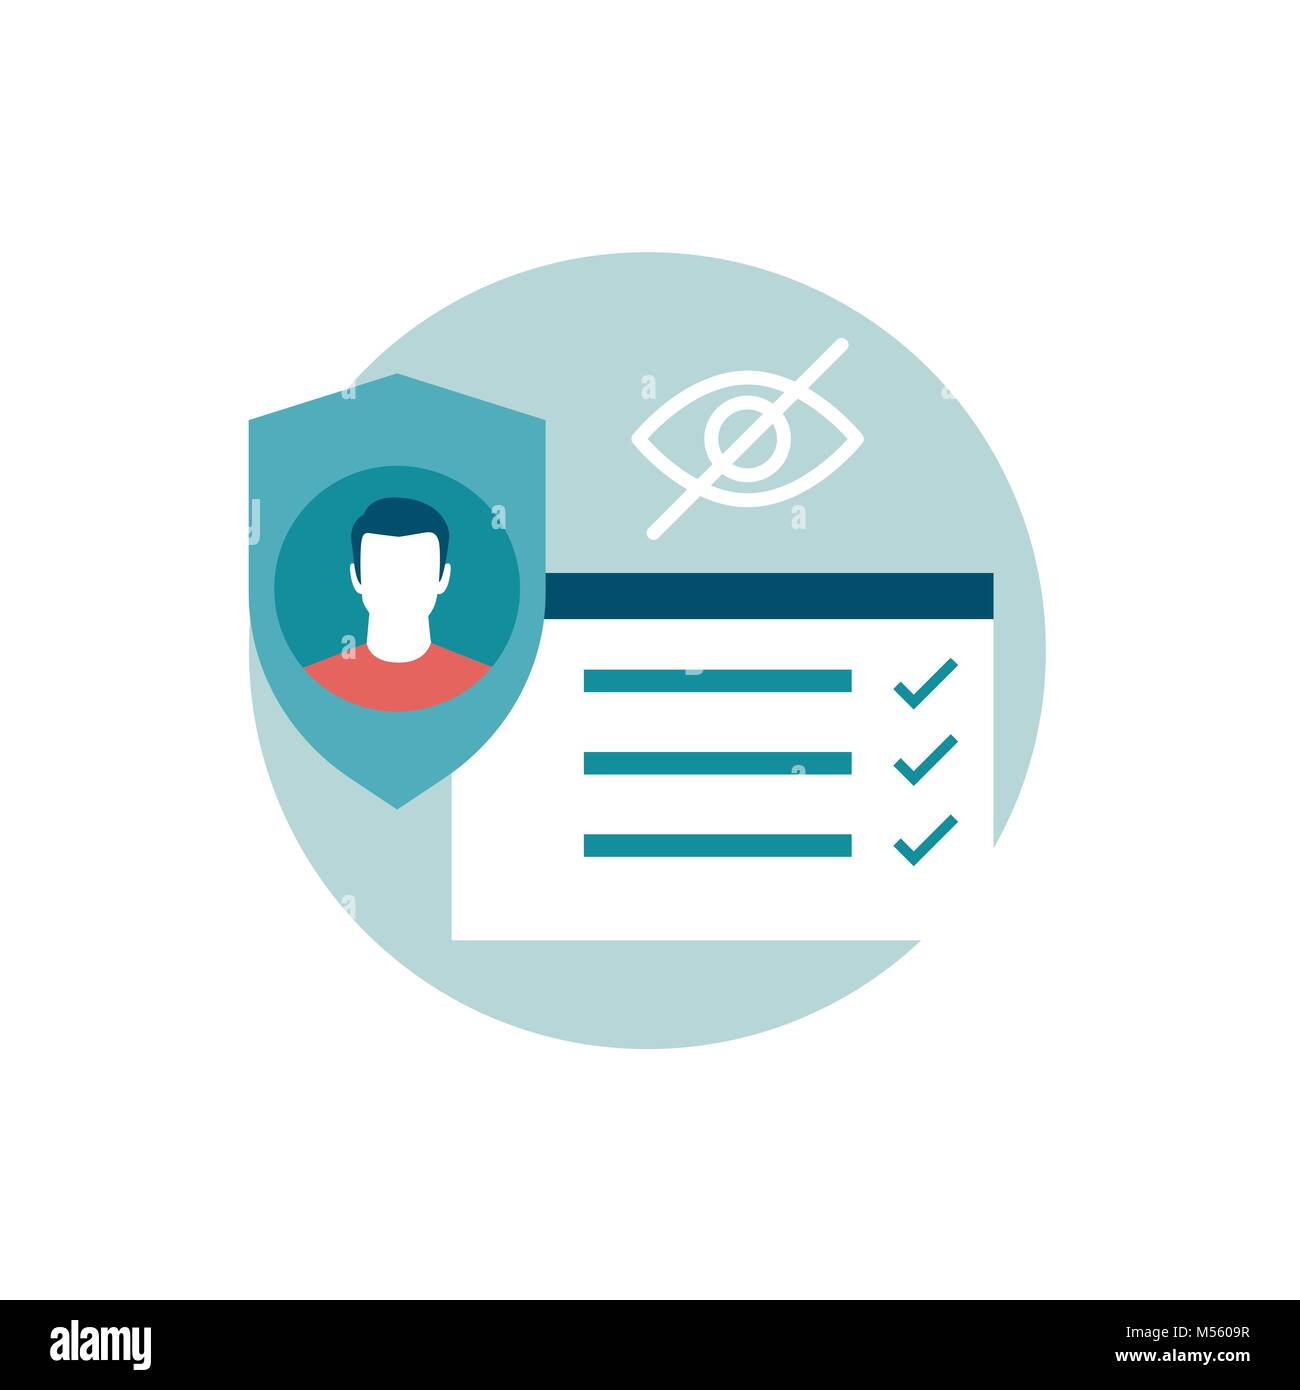 Check your privacy and your profile settings, cyber security icon Stock Vector